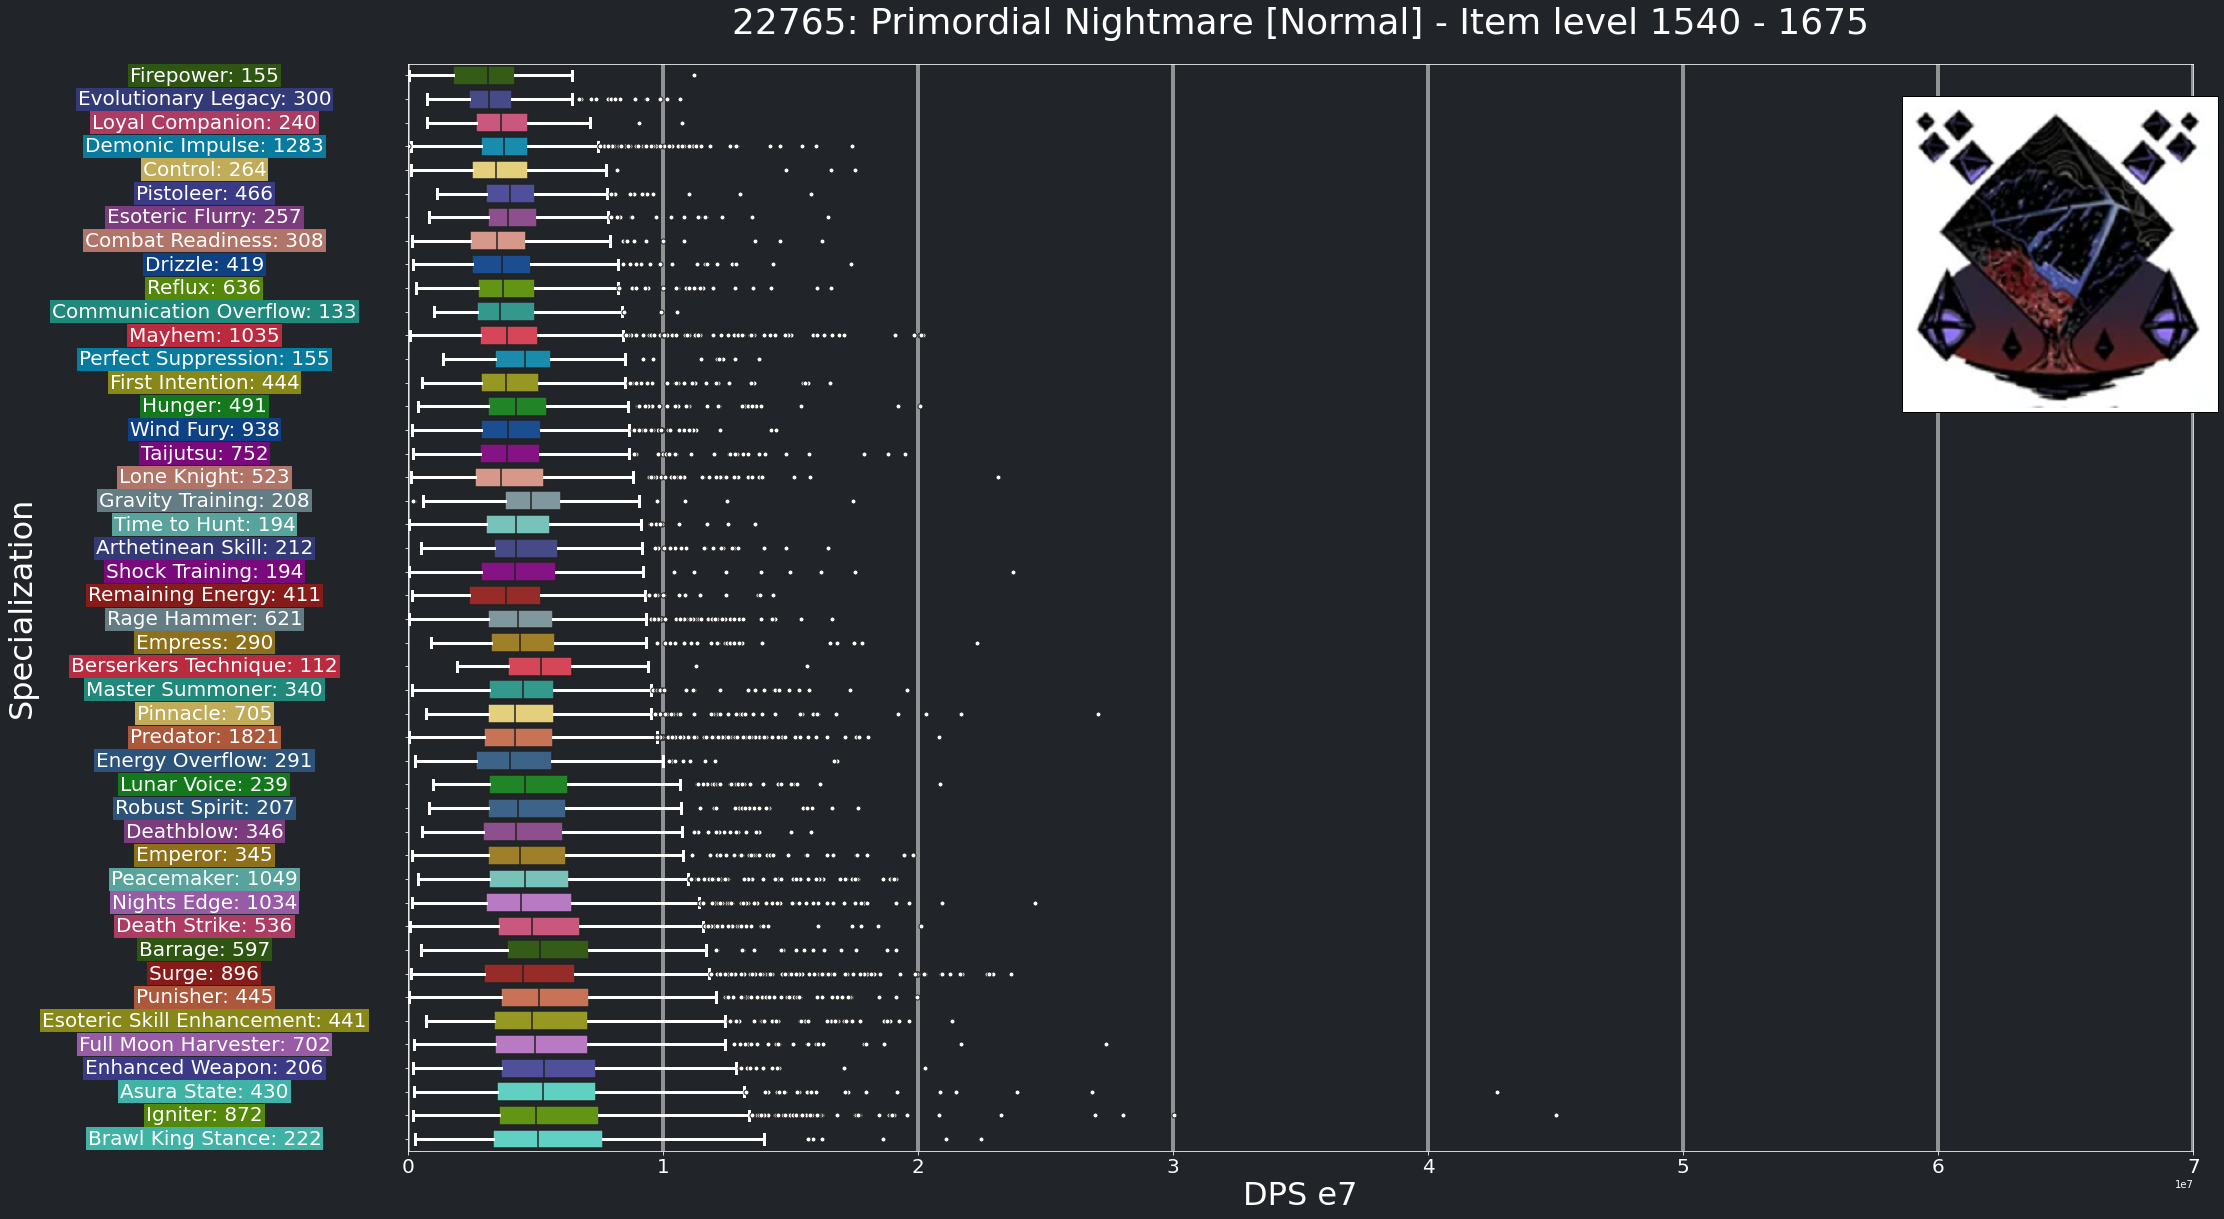 DPS_PrimordialNightmareNormal_1540to1675_Max.png